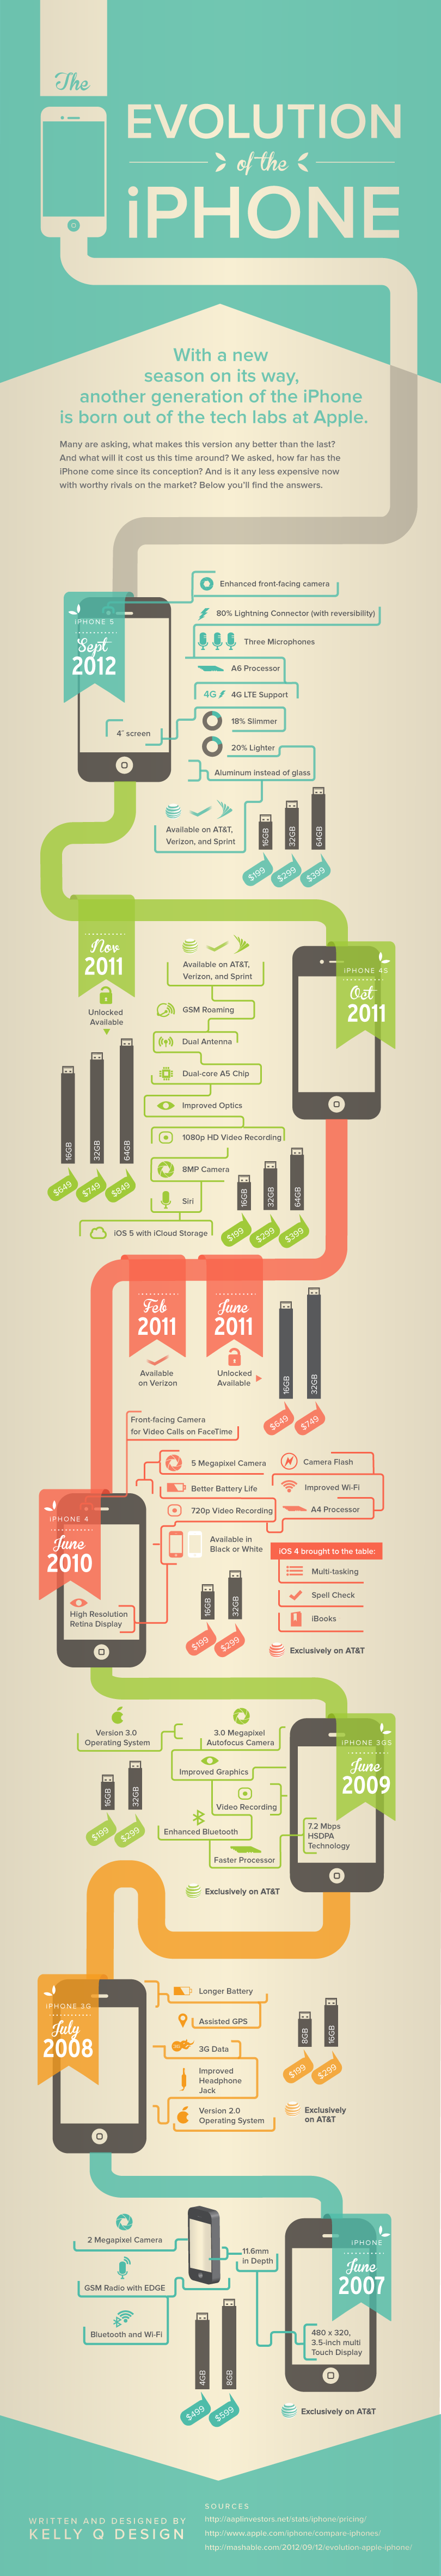 iPhone Evolution Completely Showcased [Infographic]